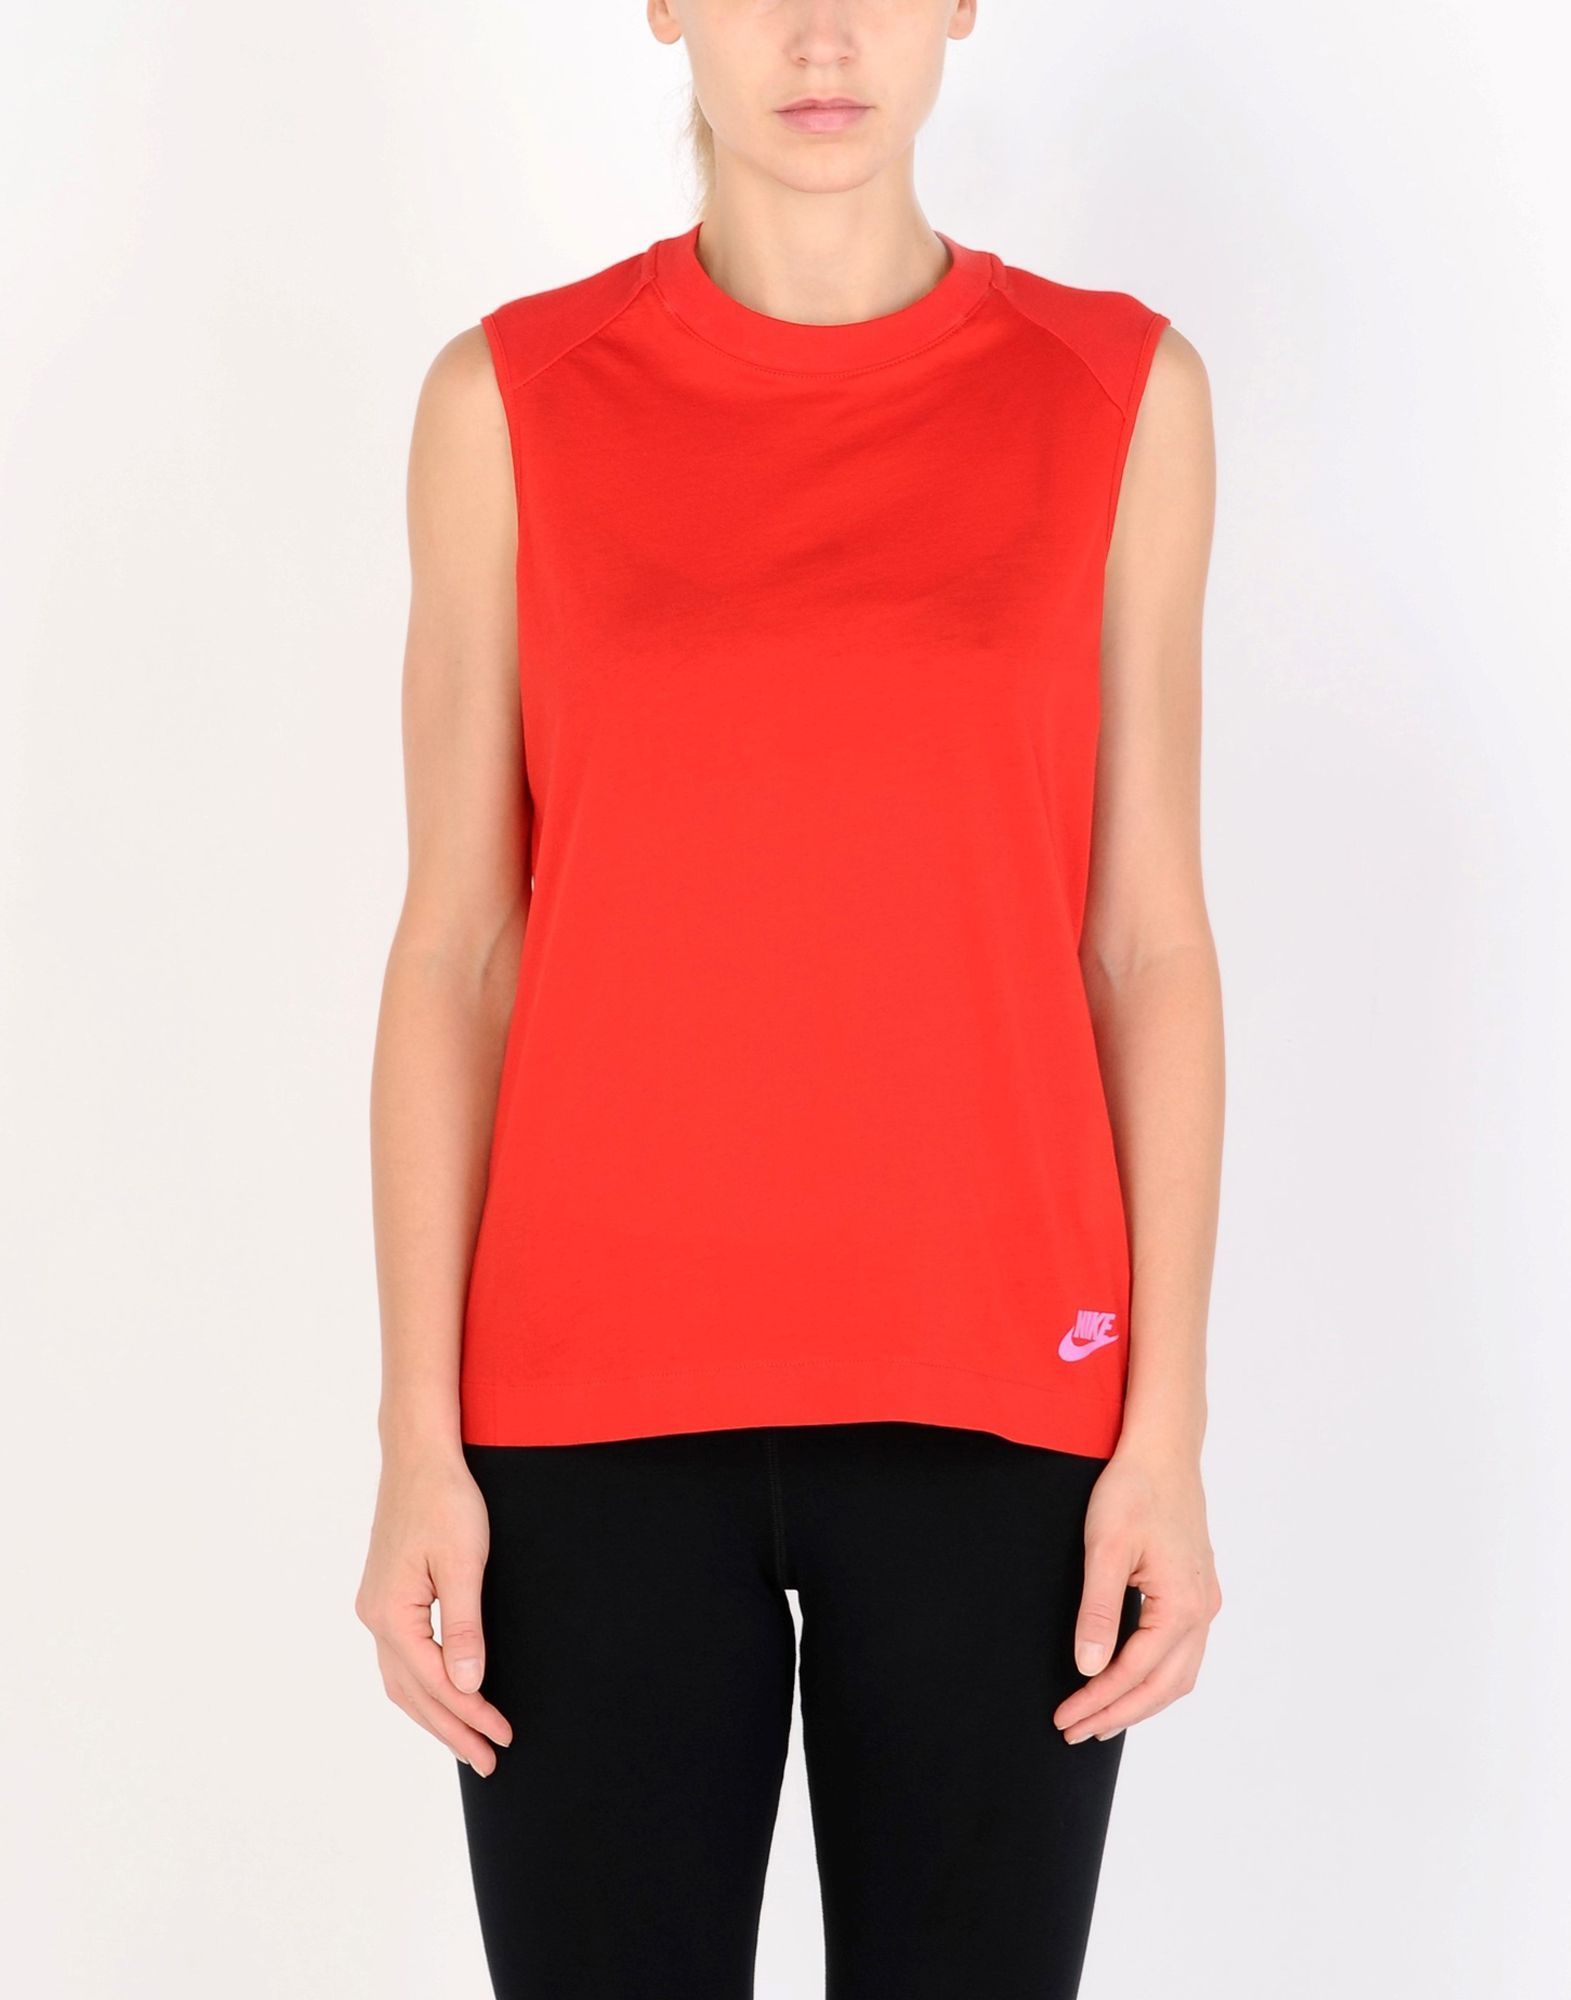 Nike Red Cotton Top